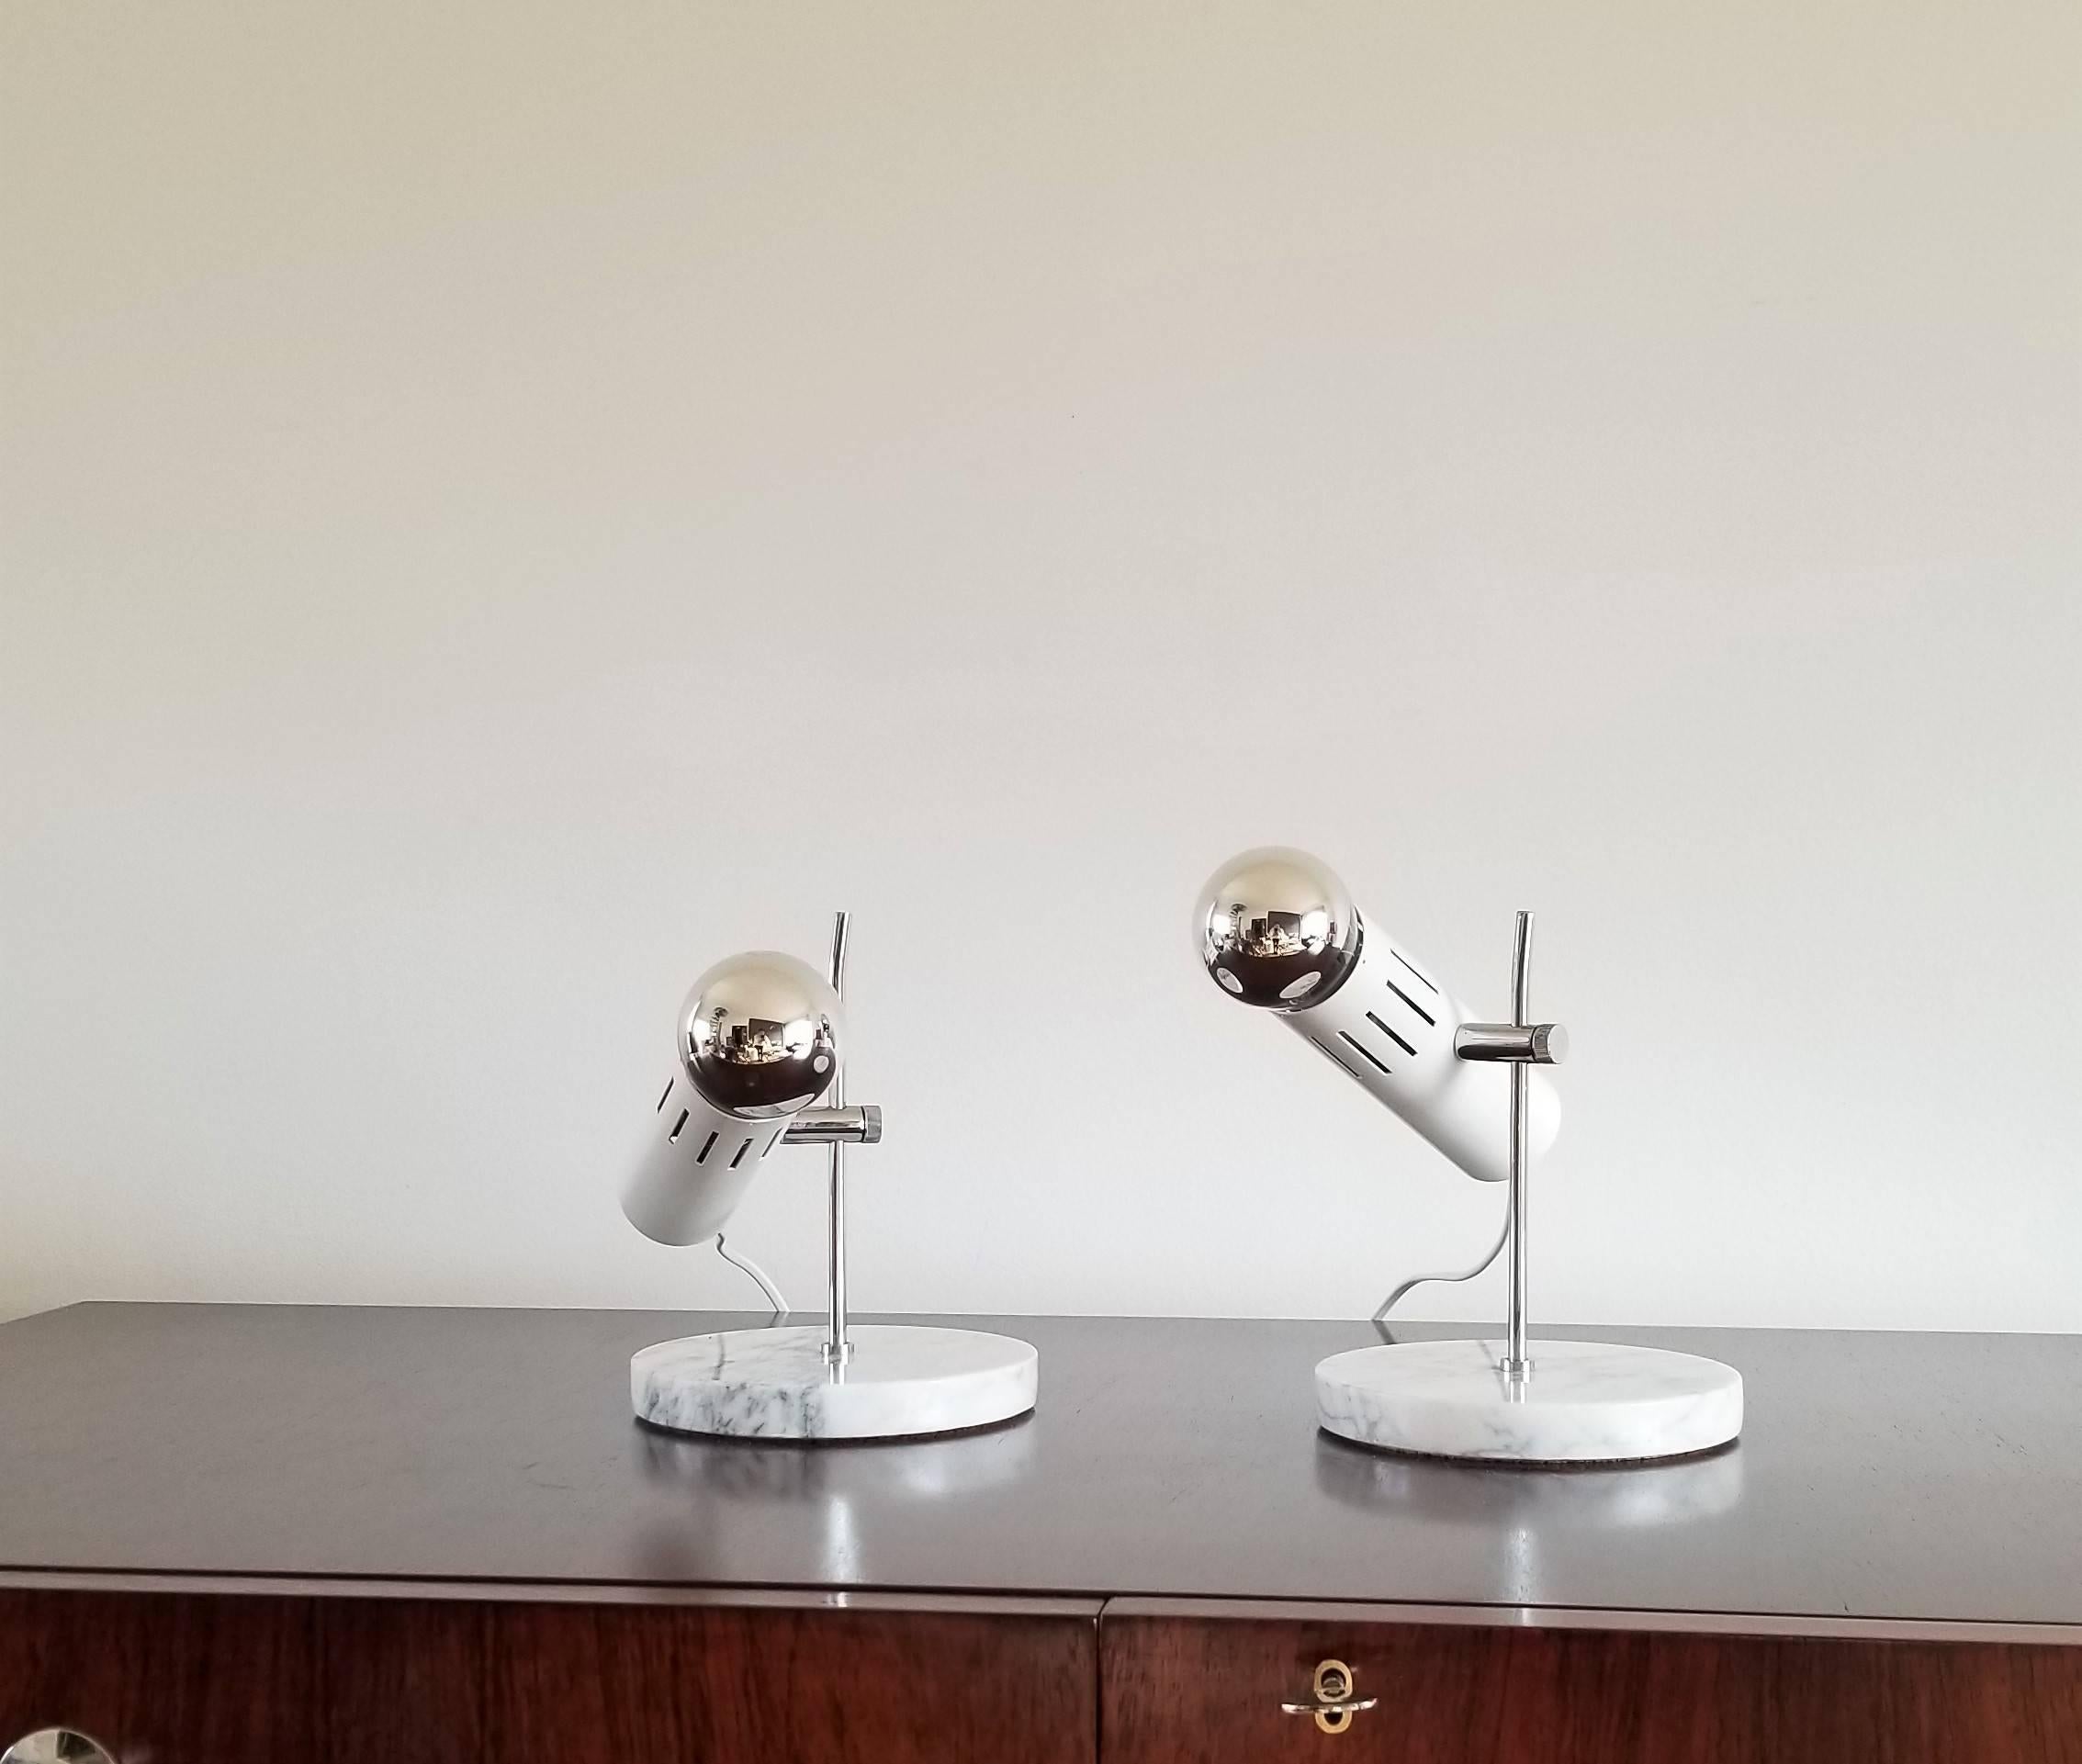 Marble, chrome and lacquered steel table lamps
Editions Disderot
France
excellent vintage condition
can be adjusted in height and can rotate around the pole
European socket and wiring
price includes rewiring for the US.
 